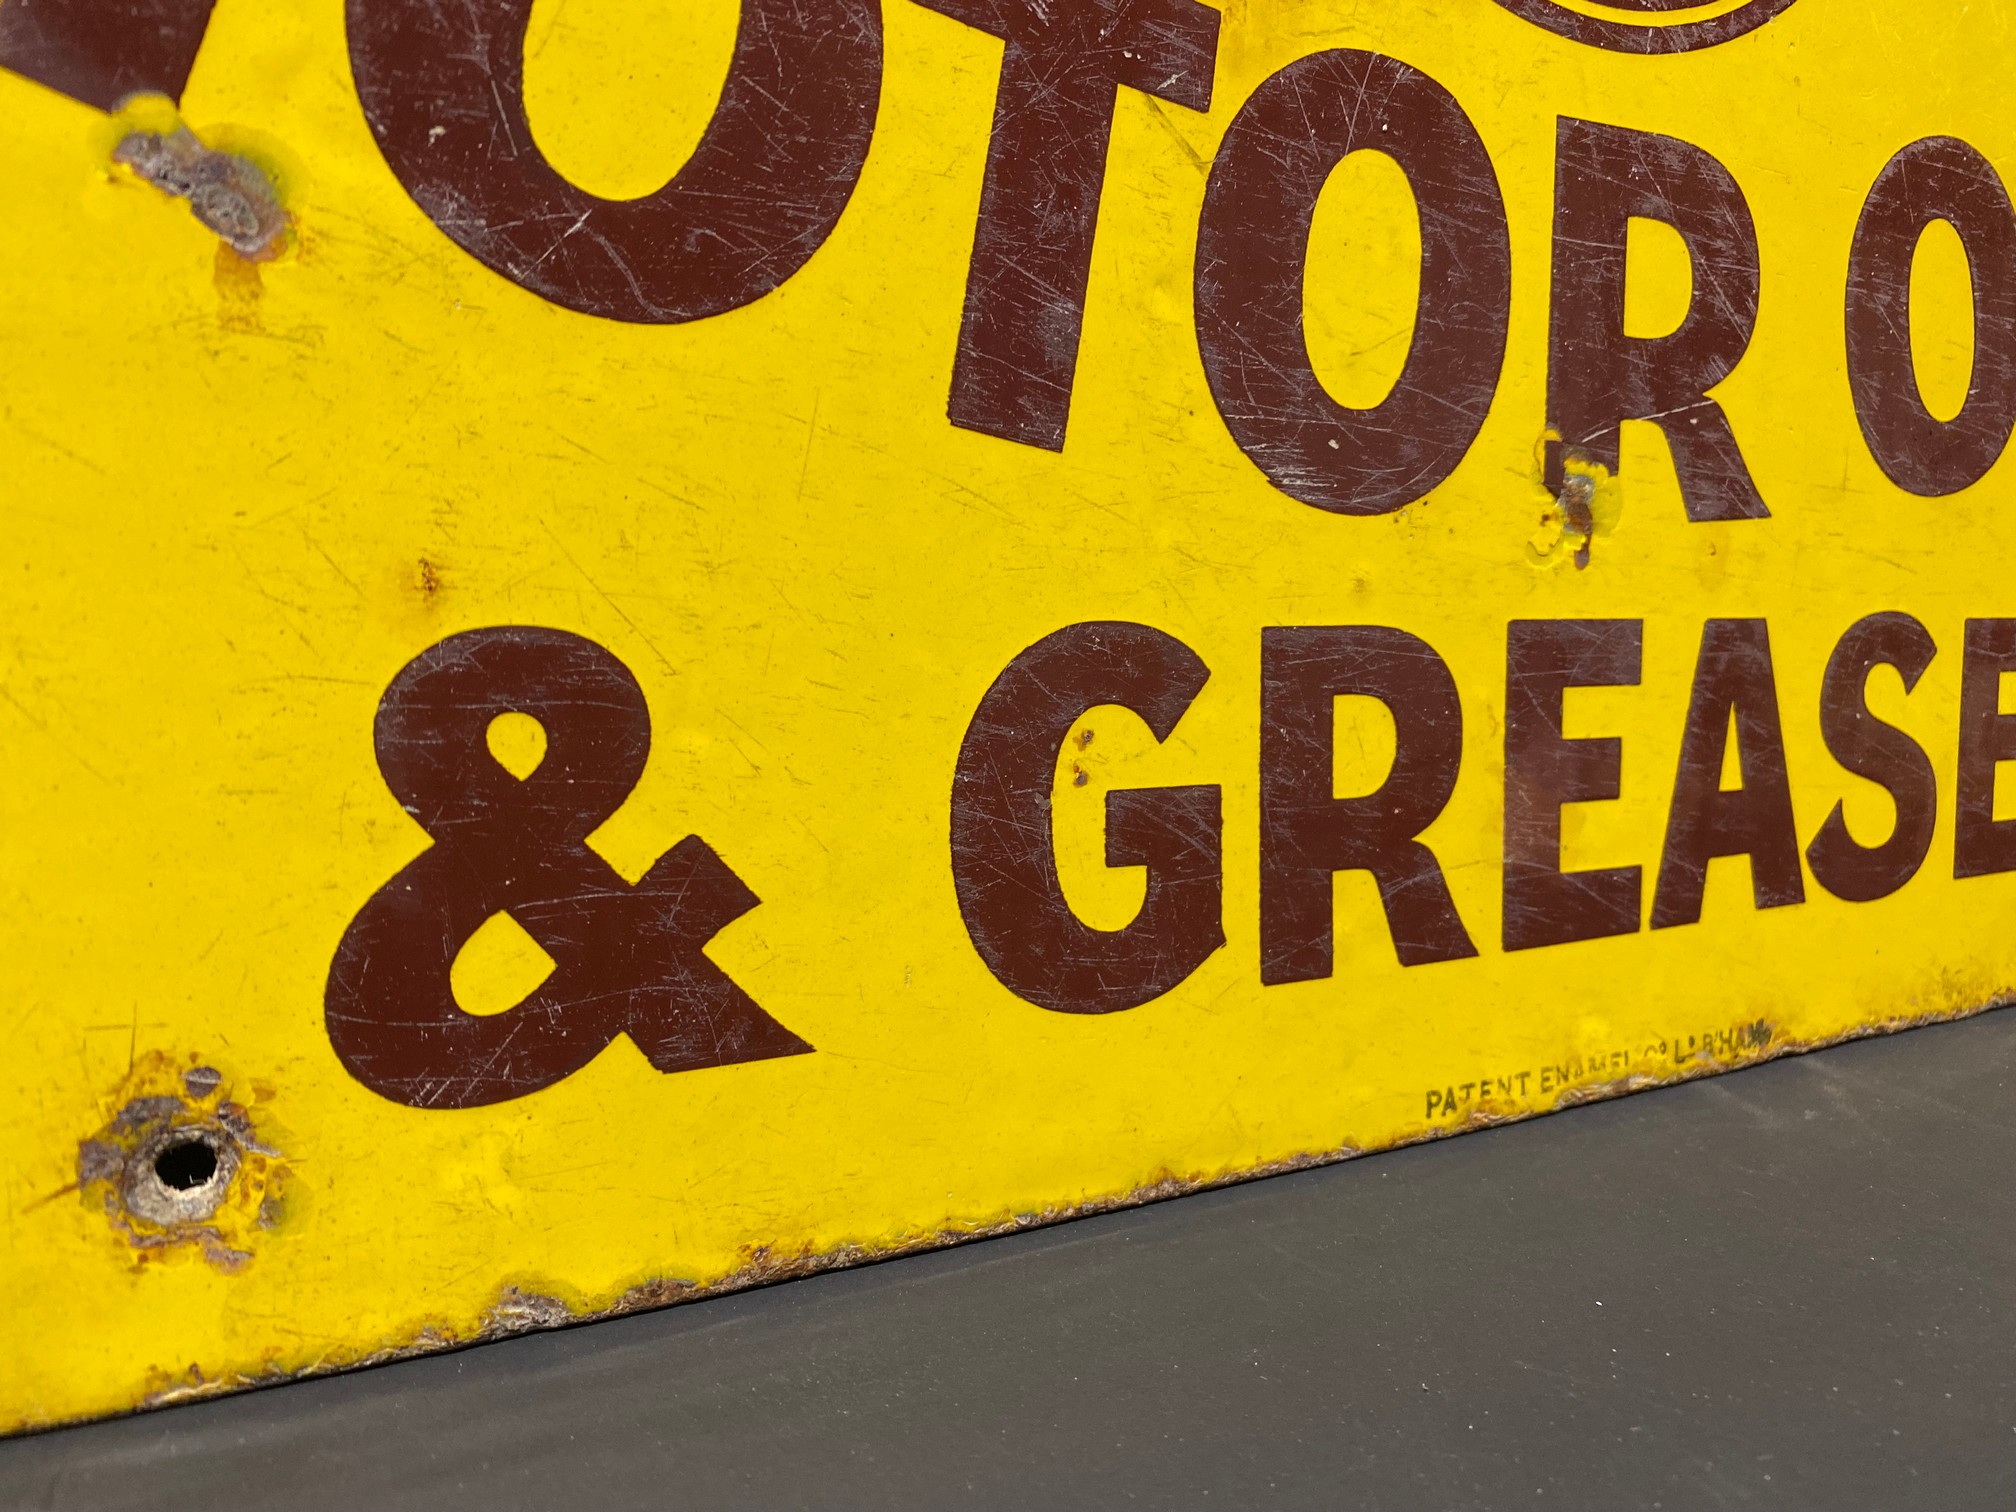 A SWARC Harp Brand Motor Oils and Greases double sided enamel sign, 20 x 16". - Image 2 of 6